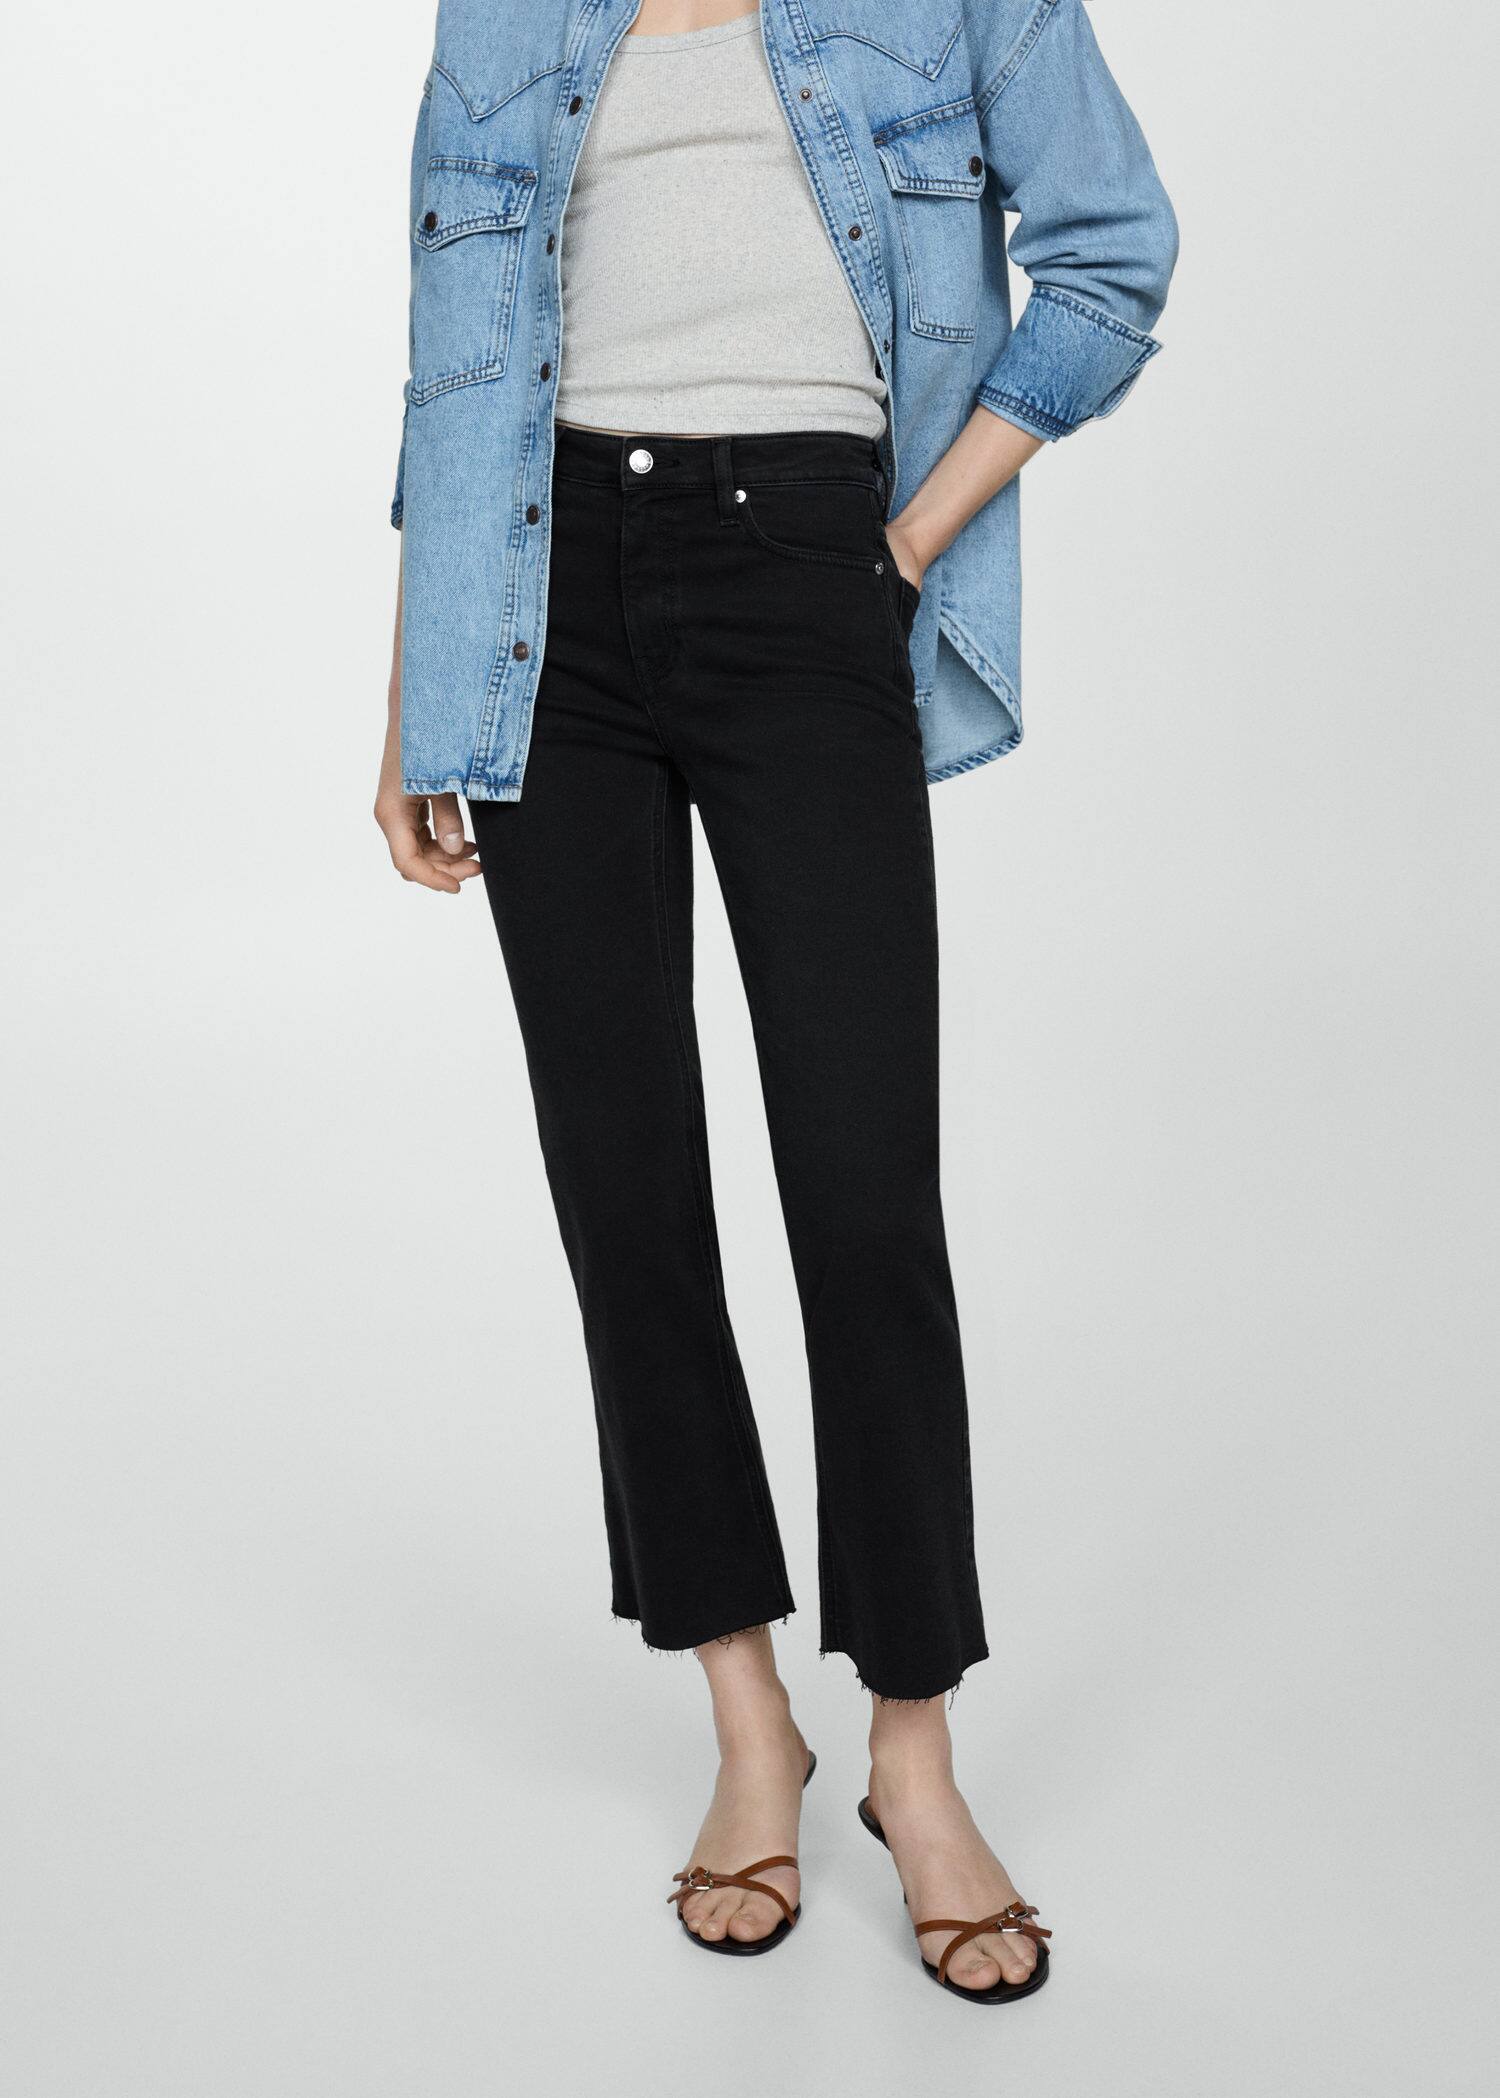 Crop flared jeans